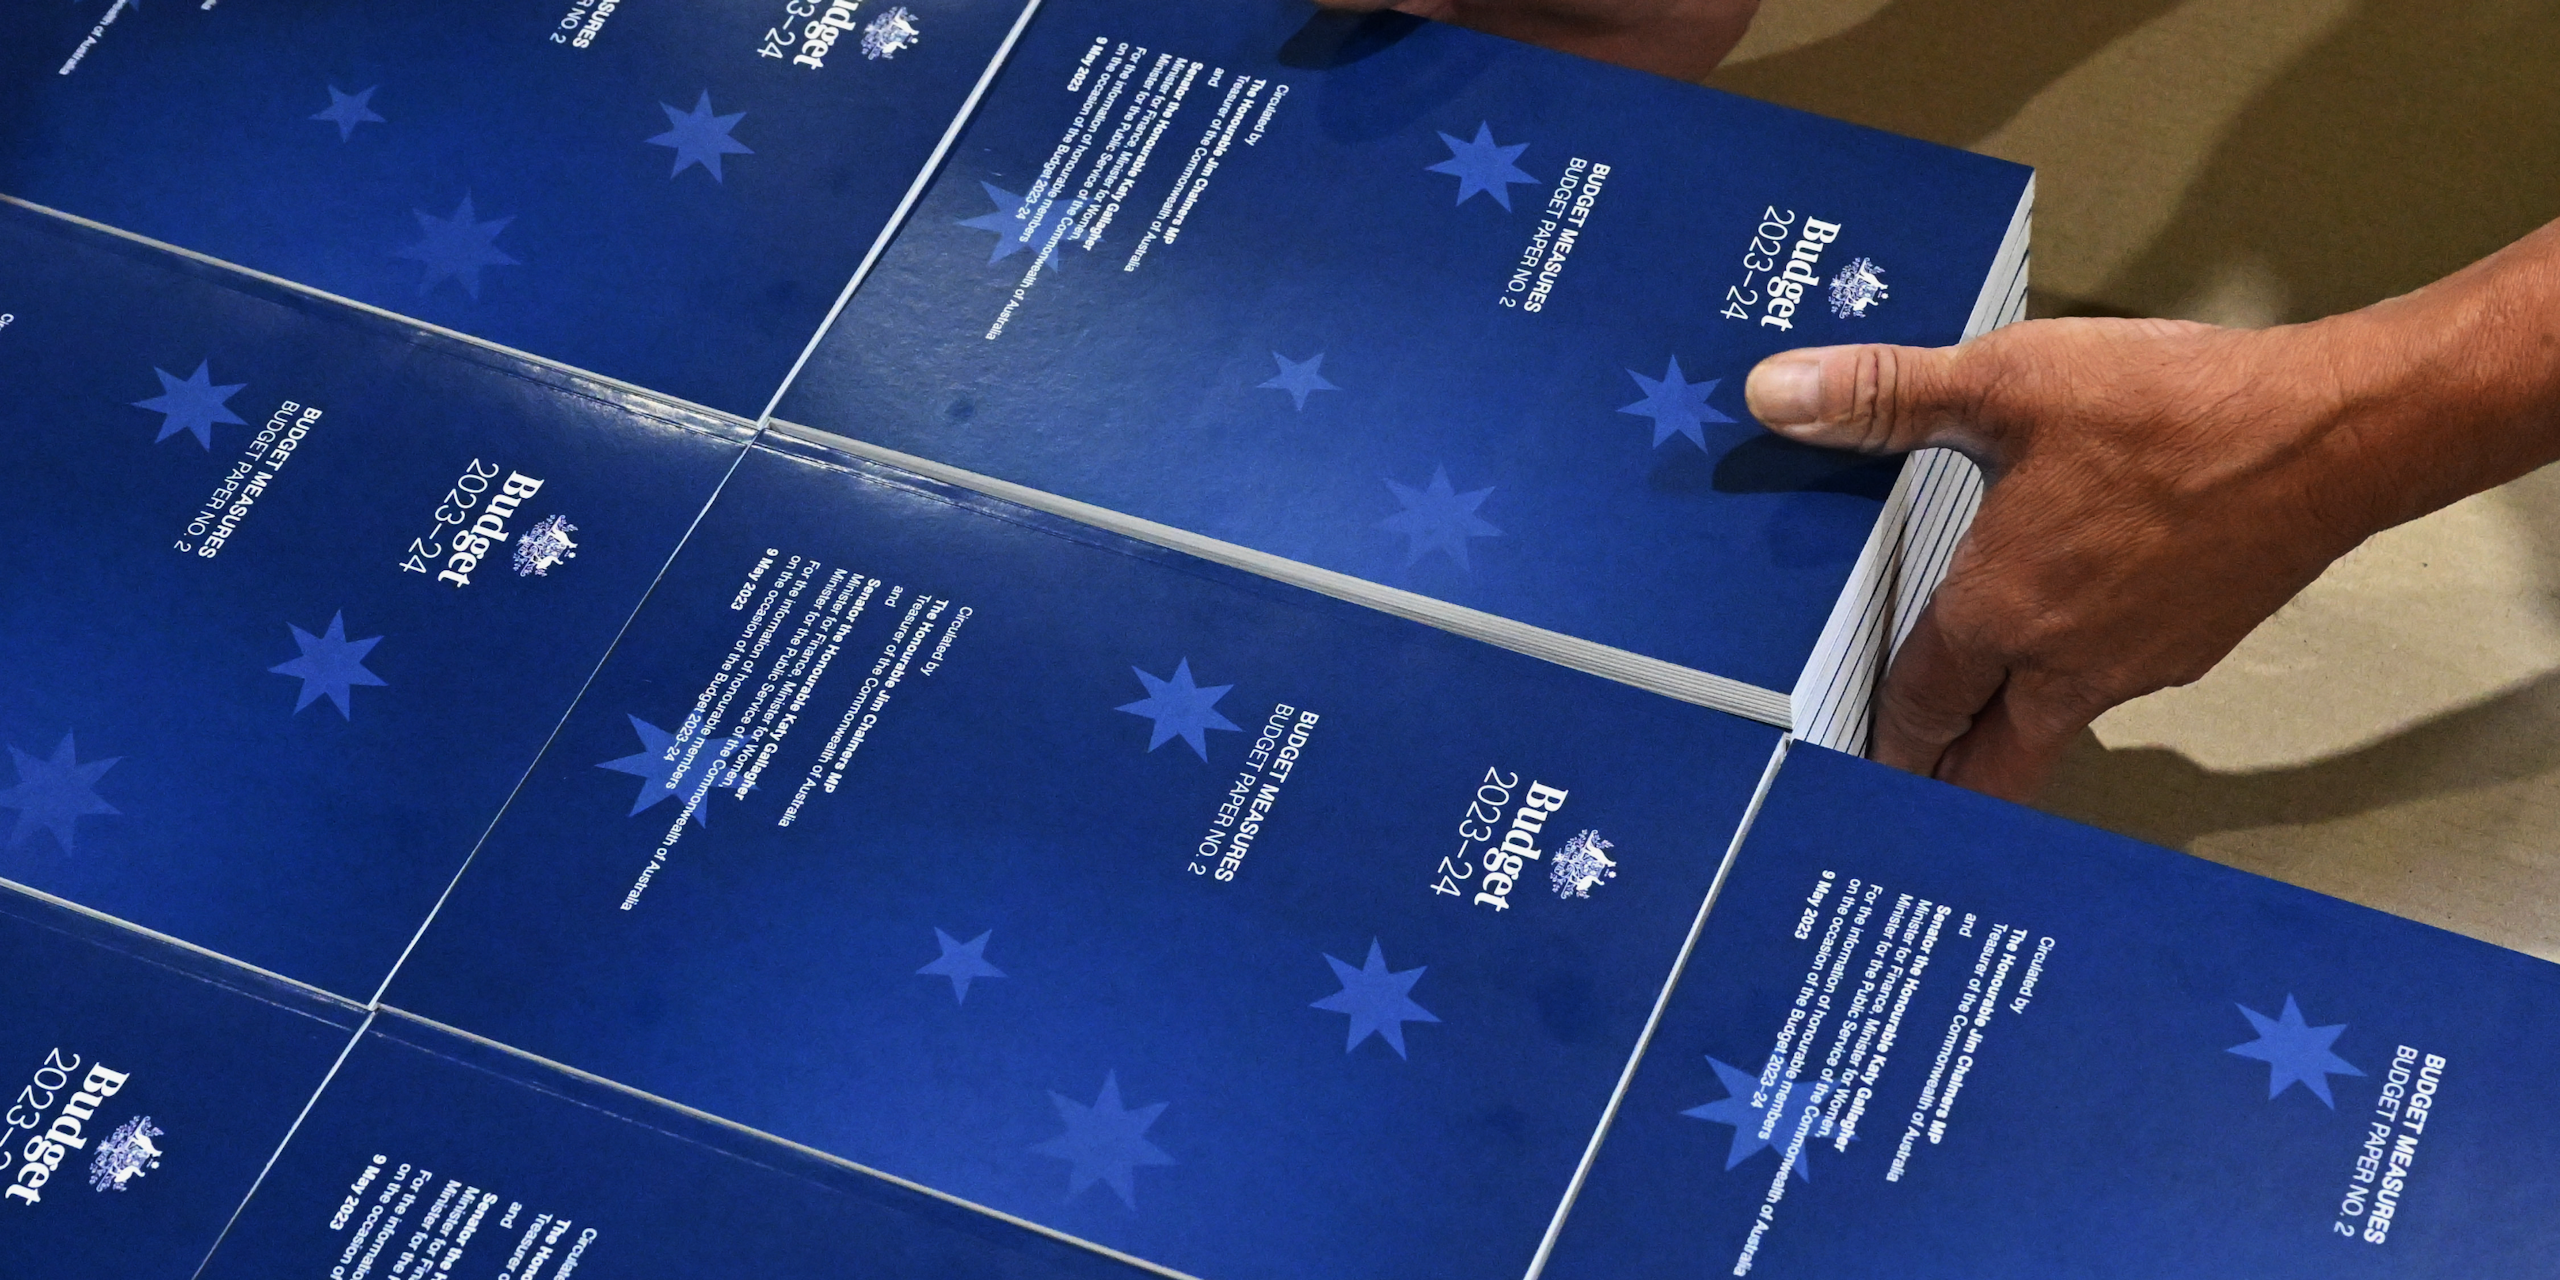 Photo of 2023-2024 Budget Papers at a printing facility prior to being delivered to Parliament House